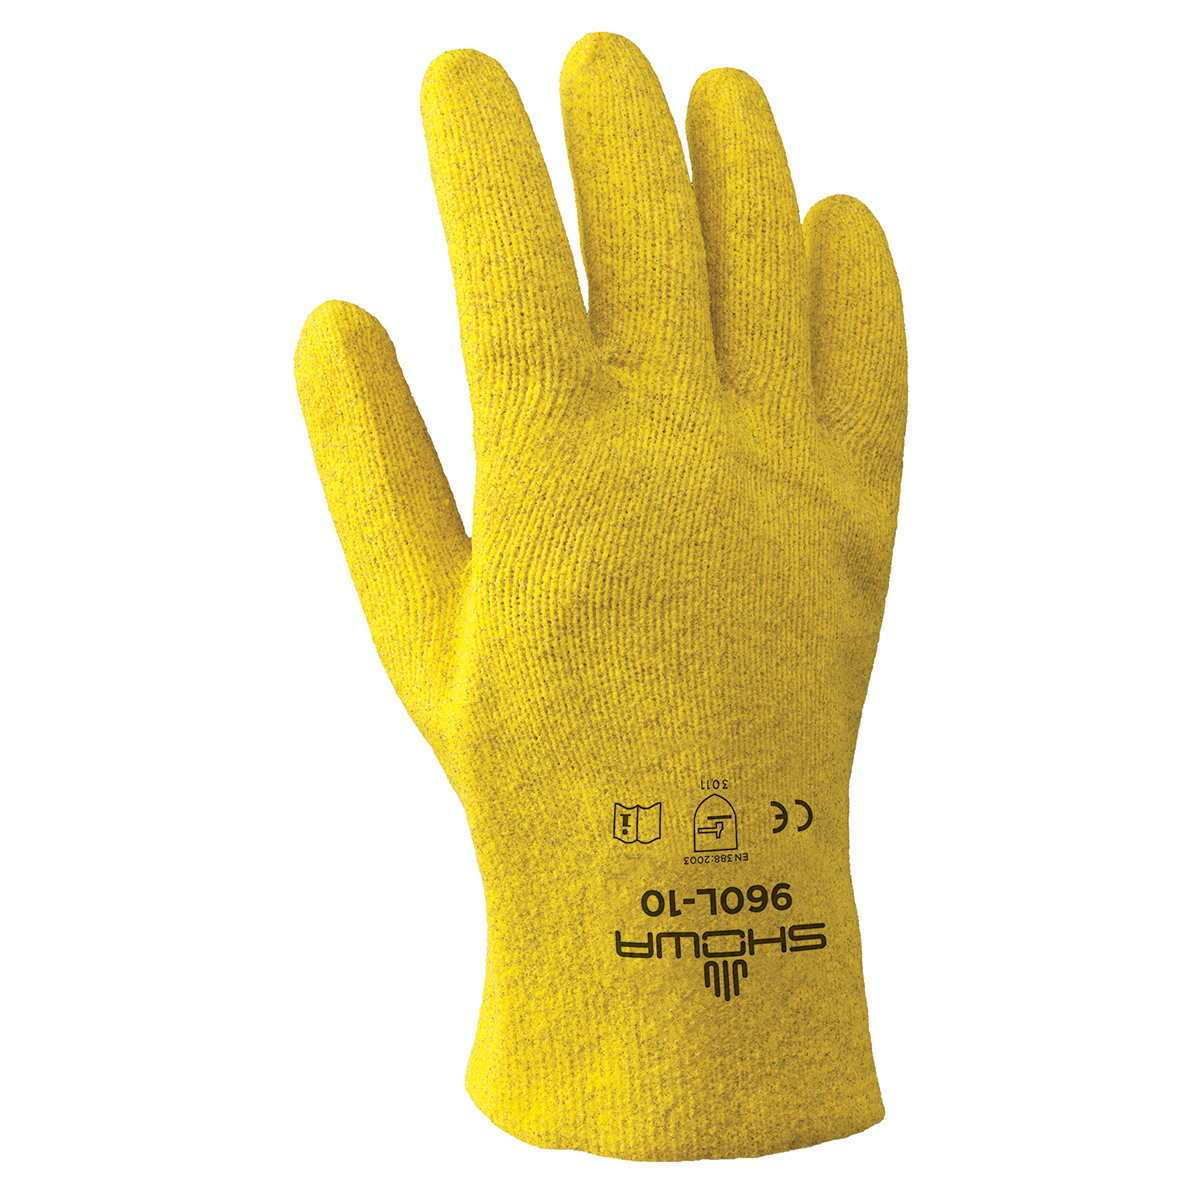 SHOWA® Size 9 Heavy Duty PVC Full Hand Coated Work Gloves With Cotton Liner And Slip-On Cuff